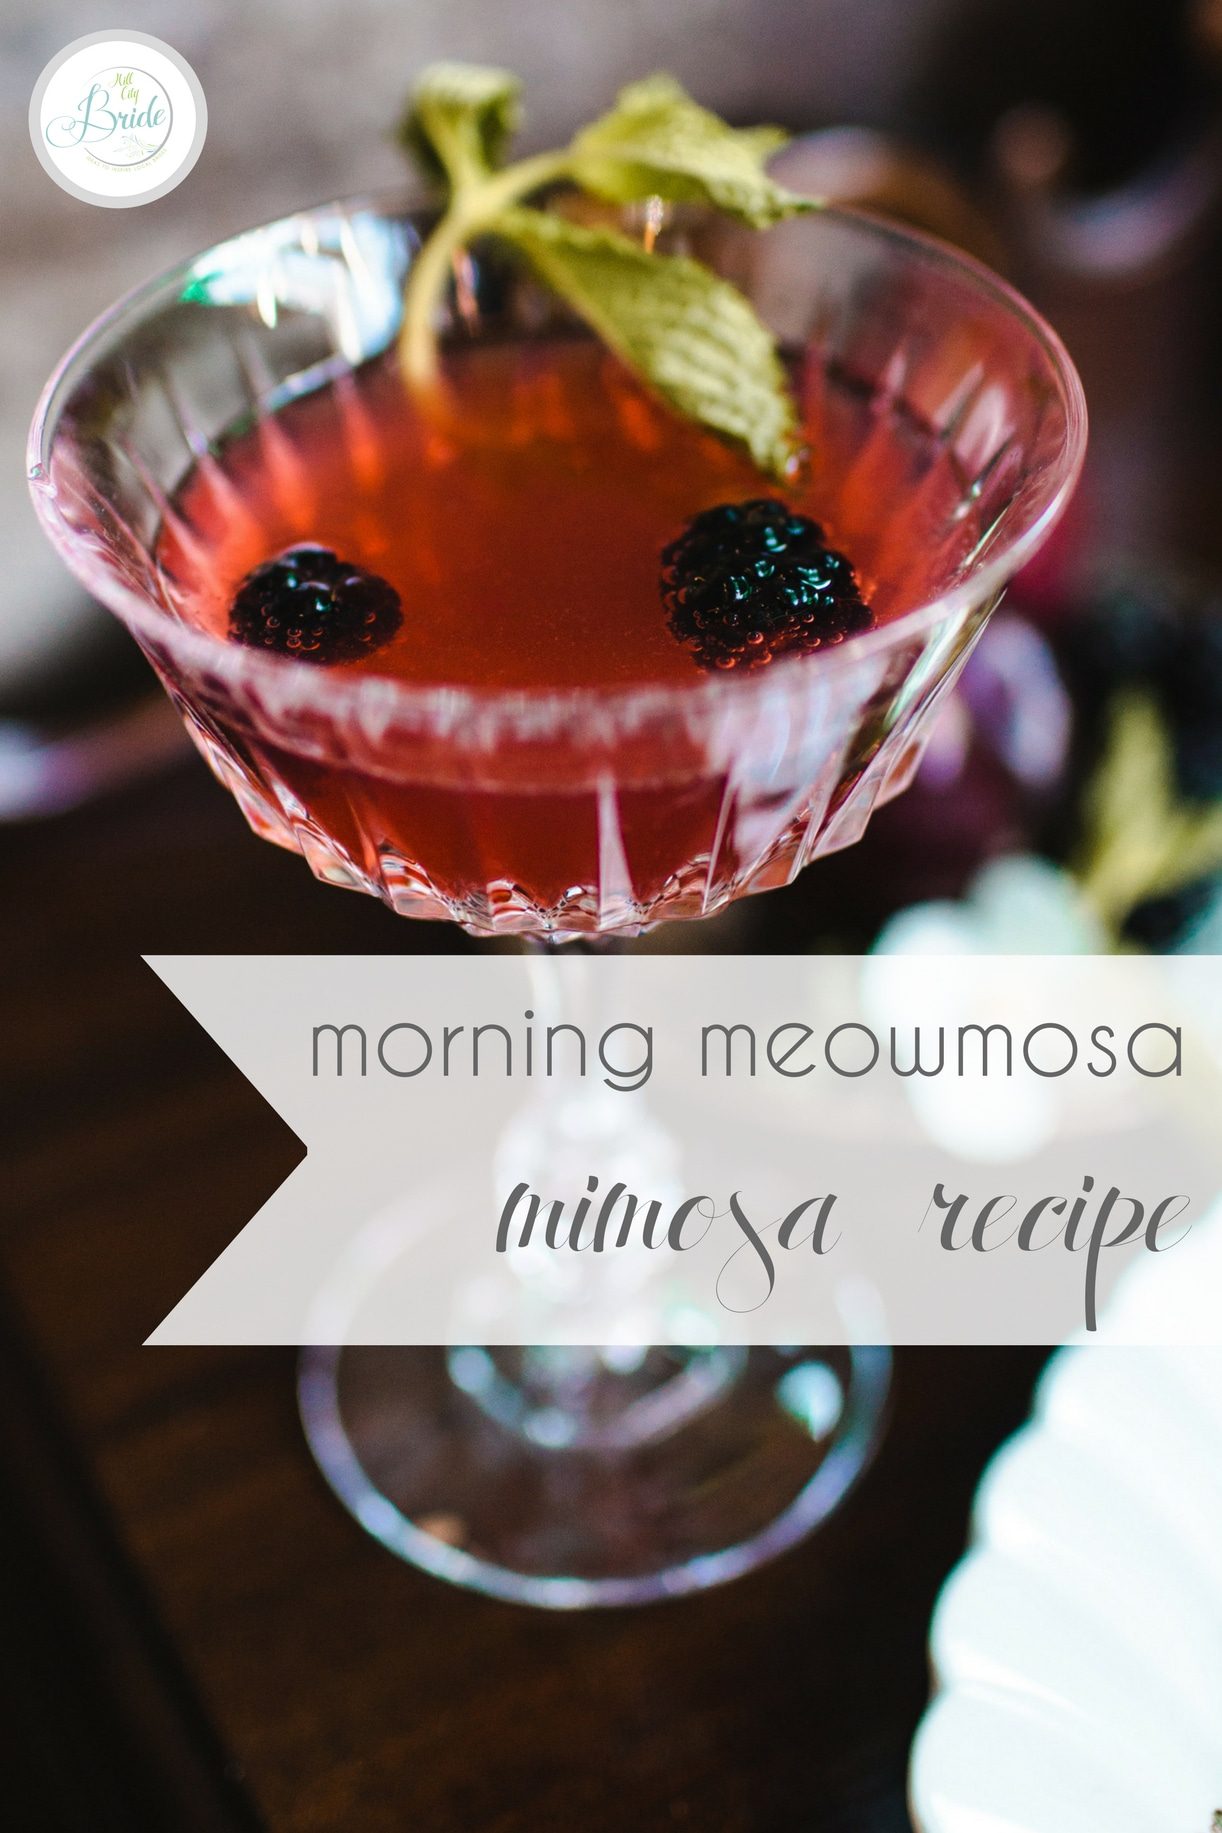 Morning Mimosa Recipe Cocktail Meowmosa as seen on Hill City Bride Virginia Wedding Blog Specialty Drink